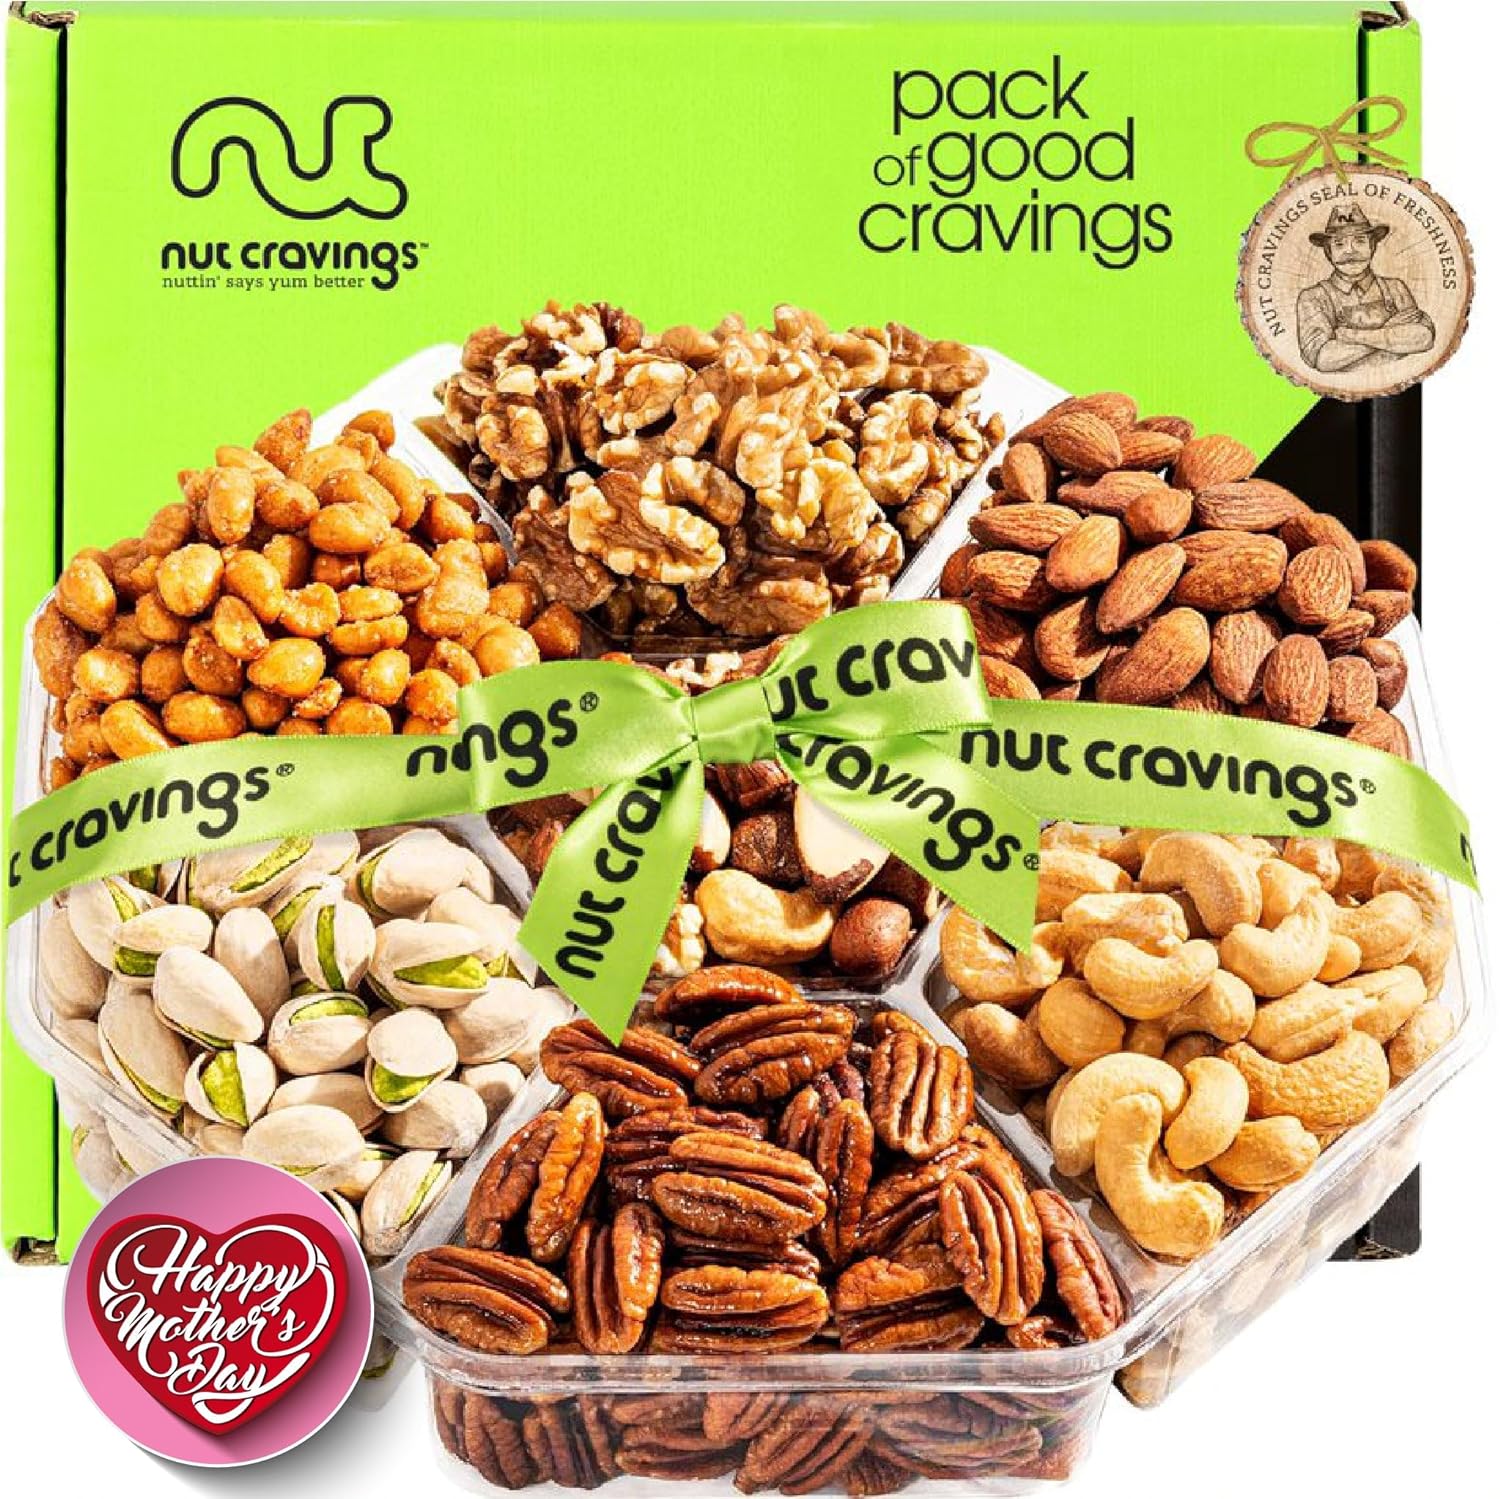 Nut Cravings Gourmet Collection - Mothers Day Mixed Nuts Gift Basket + Green Ribbon (7 Assortments, 1 LB) Arrangement Platter, Birthday Care Package - Healthy Kosher USA Made